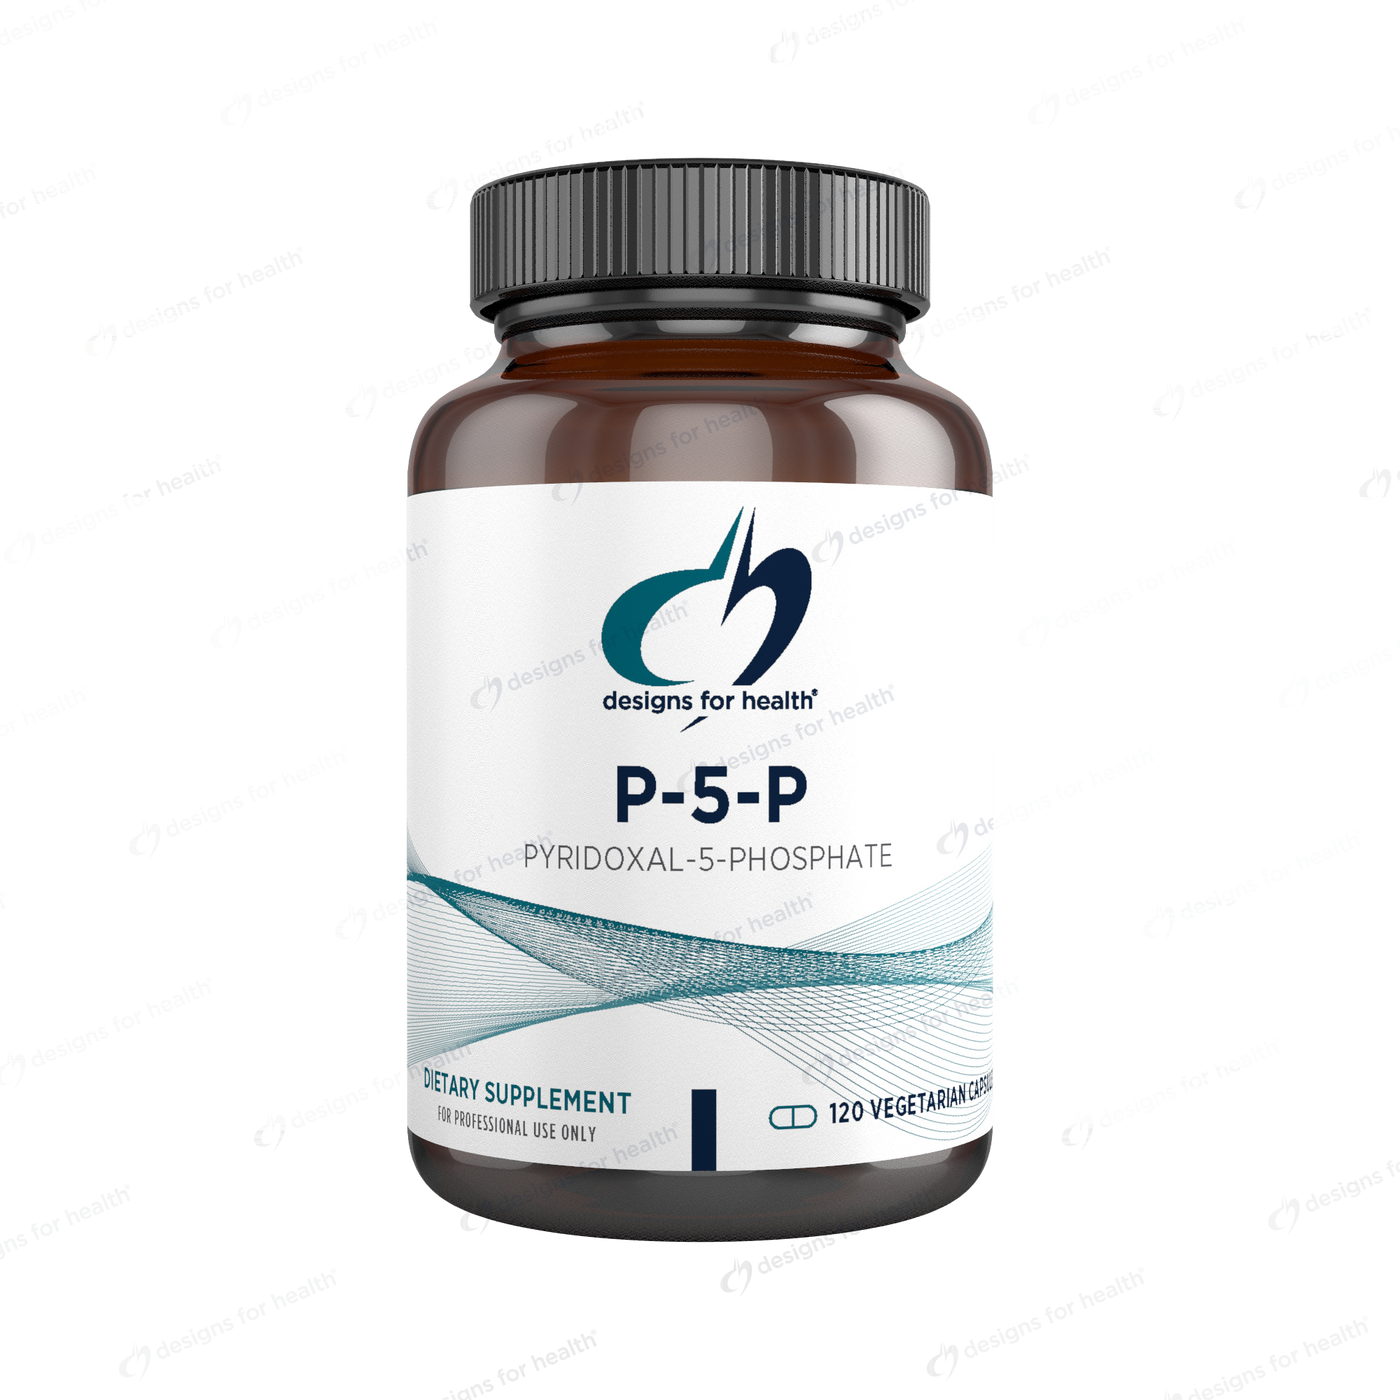 P-5-P 50 mg  Curated Wellness